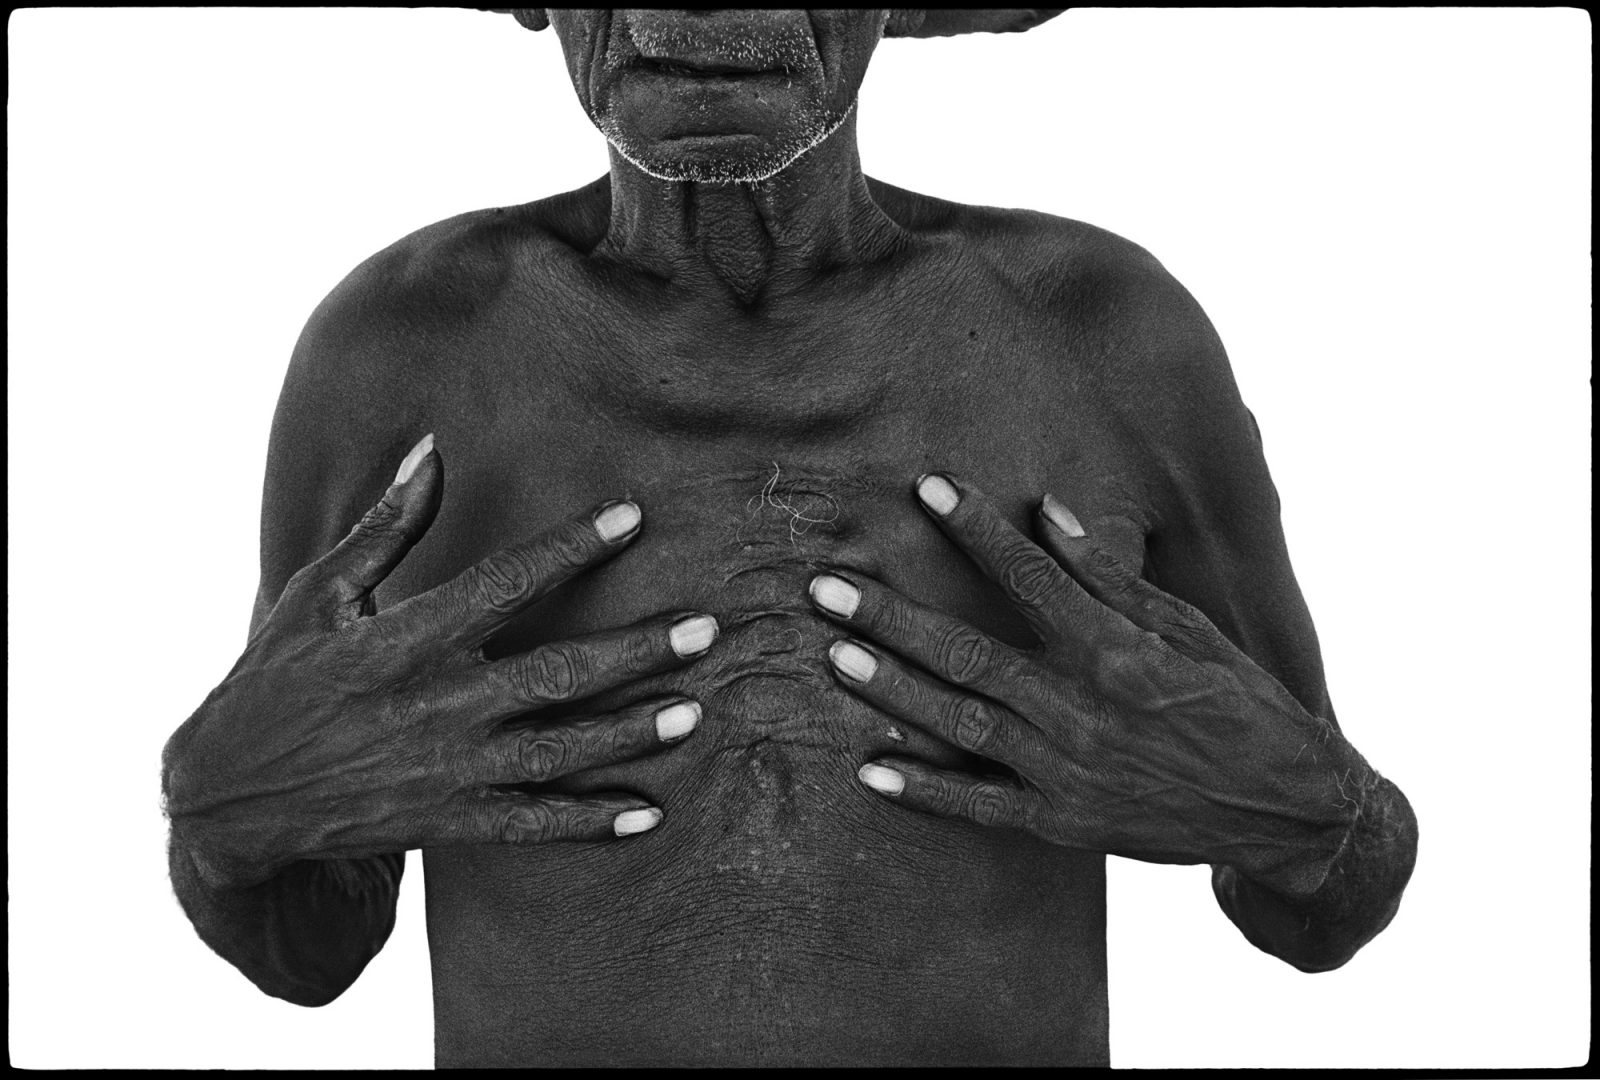 Aborigine, a photograph by Brian Lanker